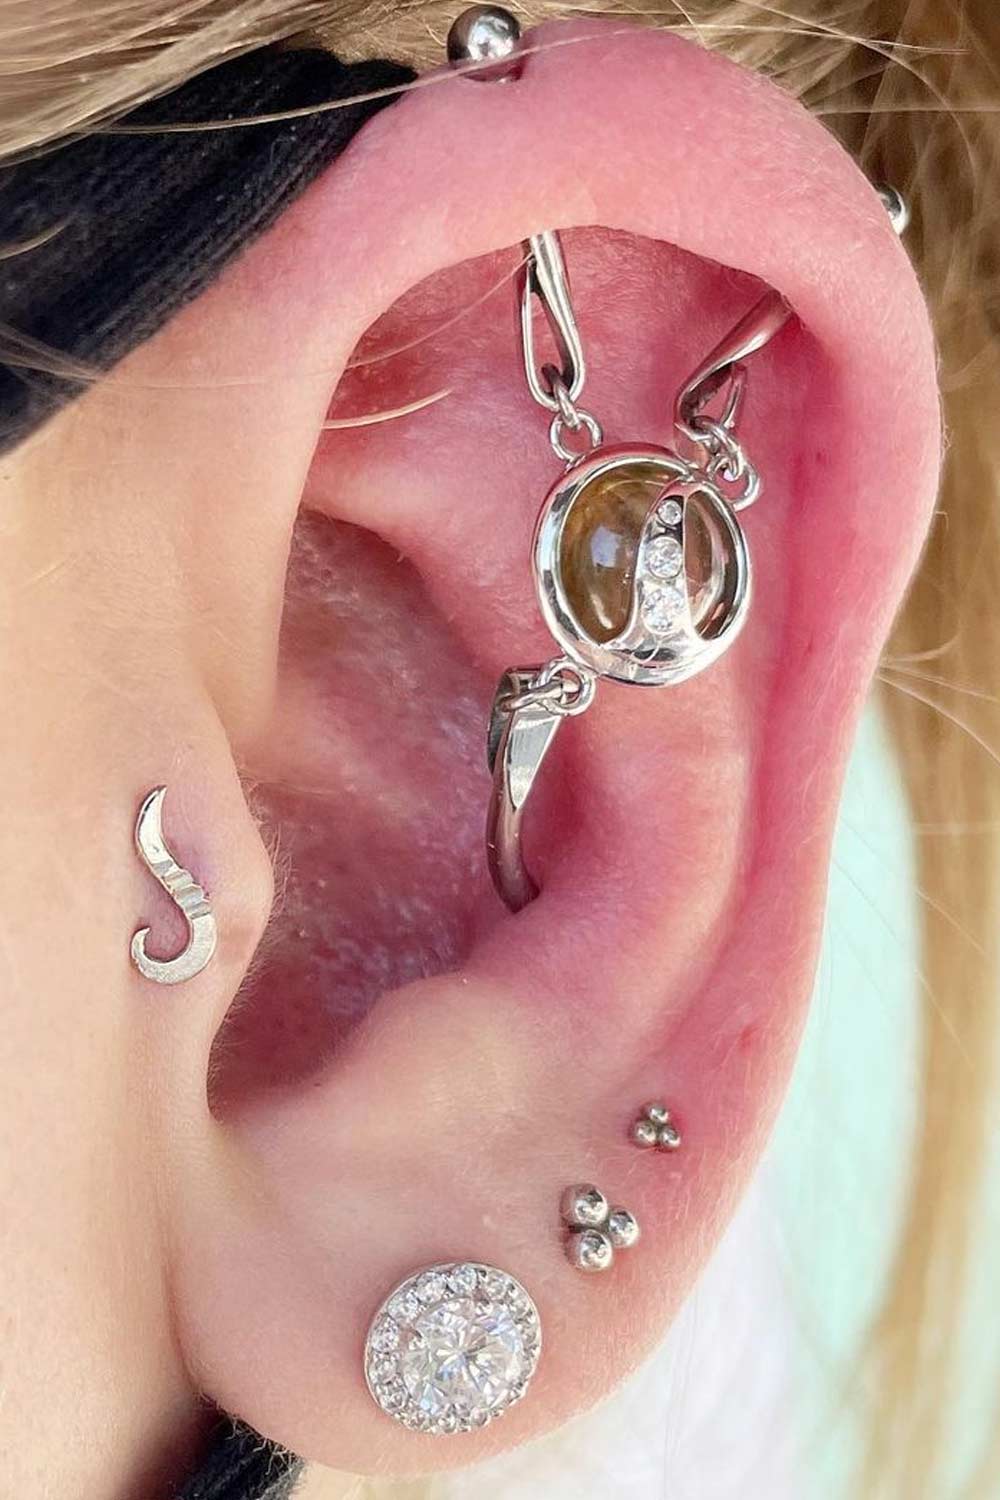 Industrial Piercing Jewelry Options